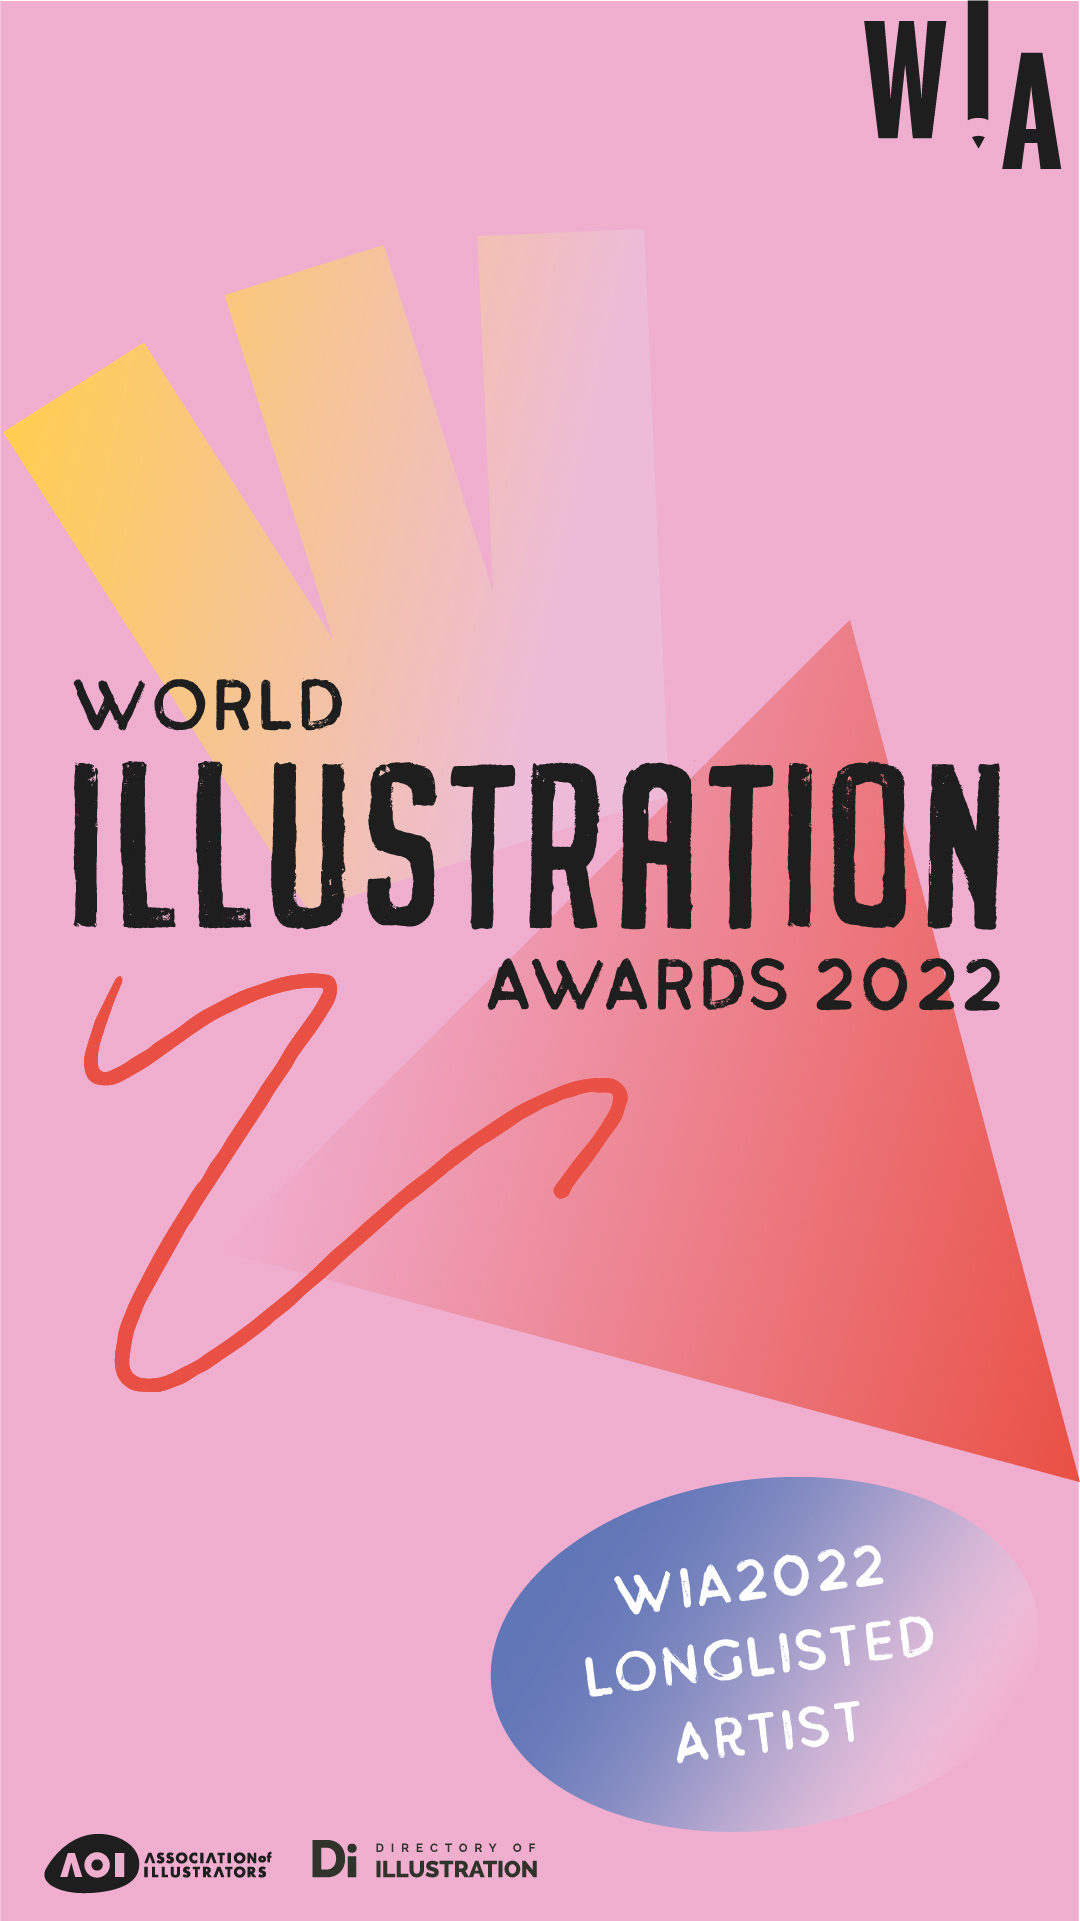 Colourful llustration and gif submits for 2022 World Illustration Awards Longlisted Artist 